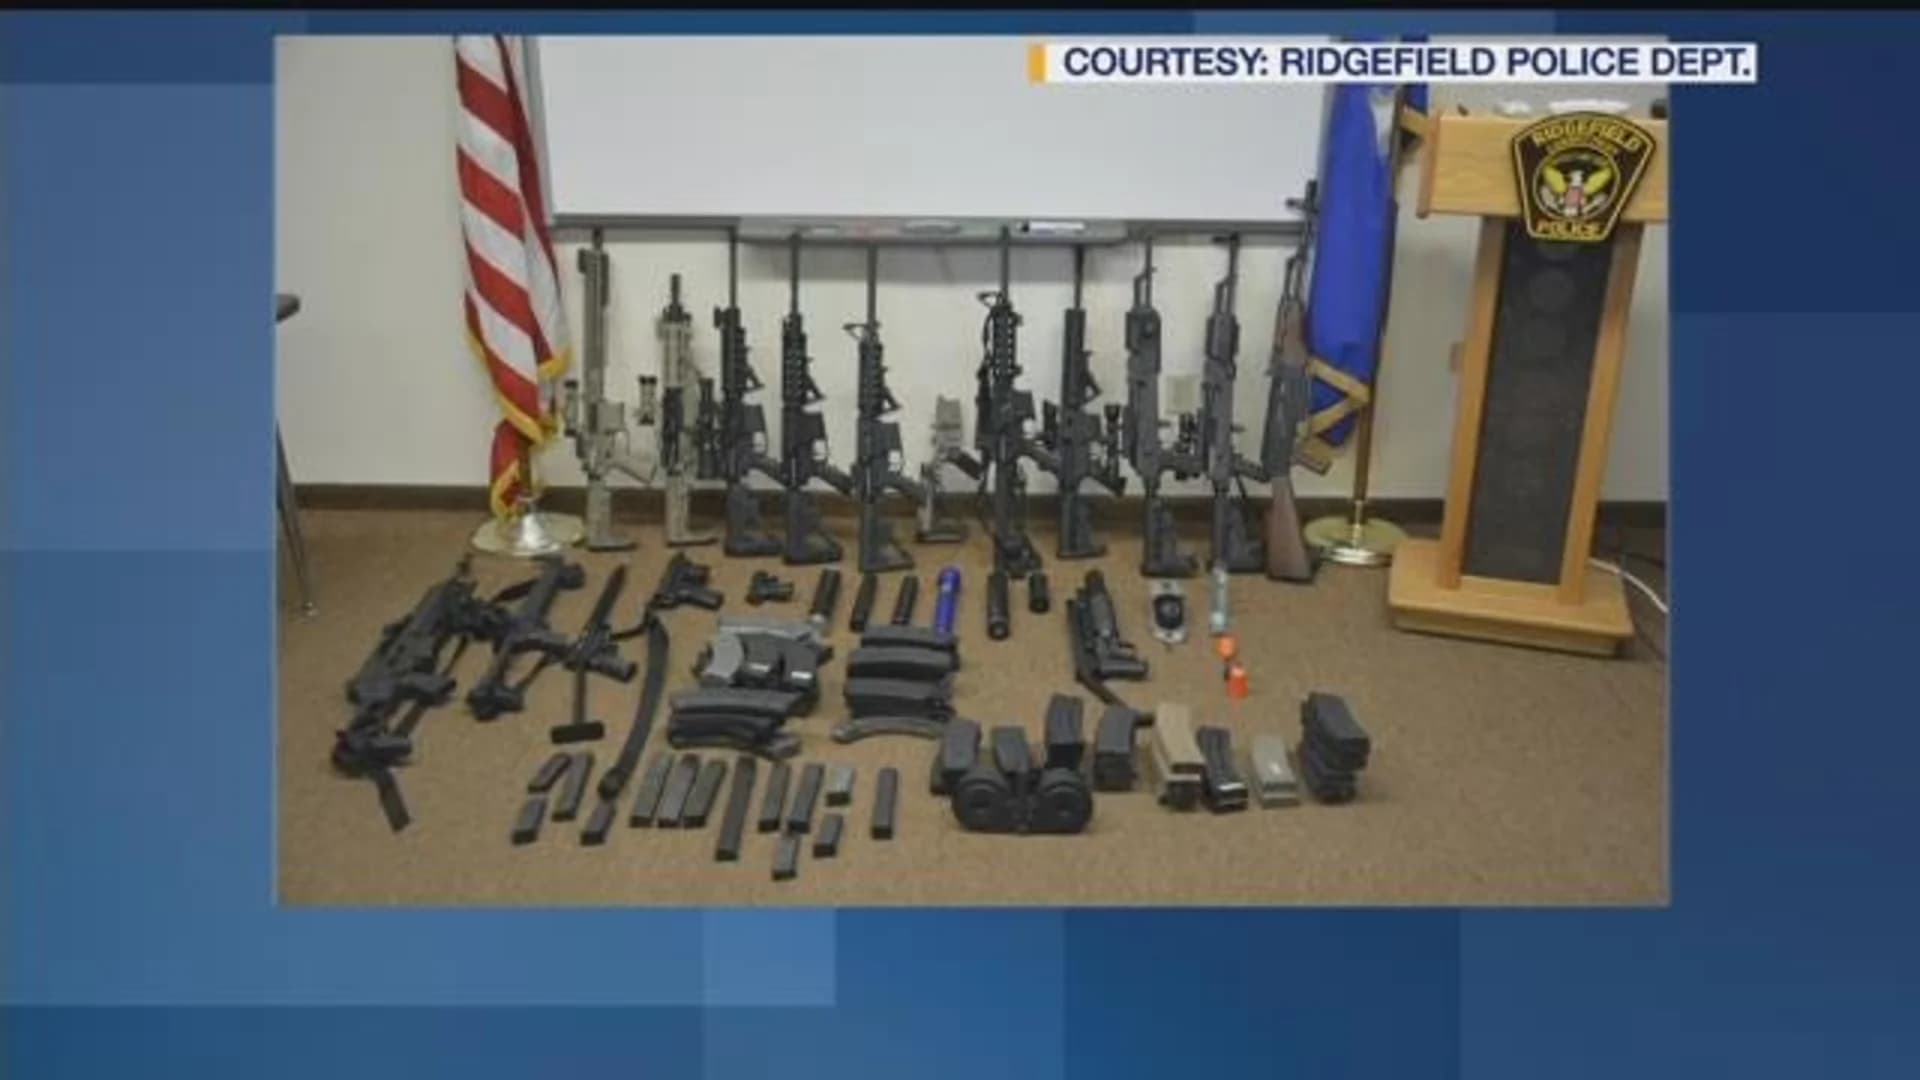 Police remove illegal firearms, explosive from Ridgefield home